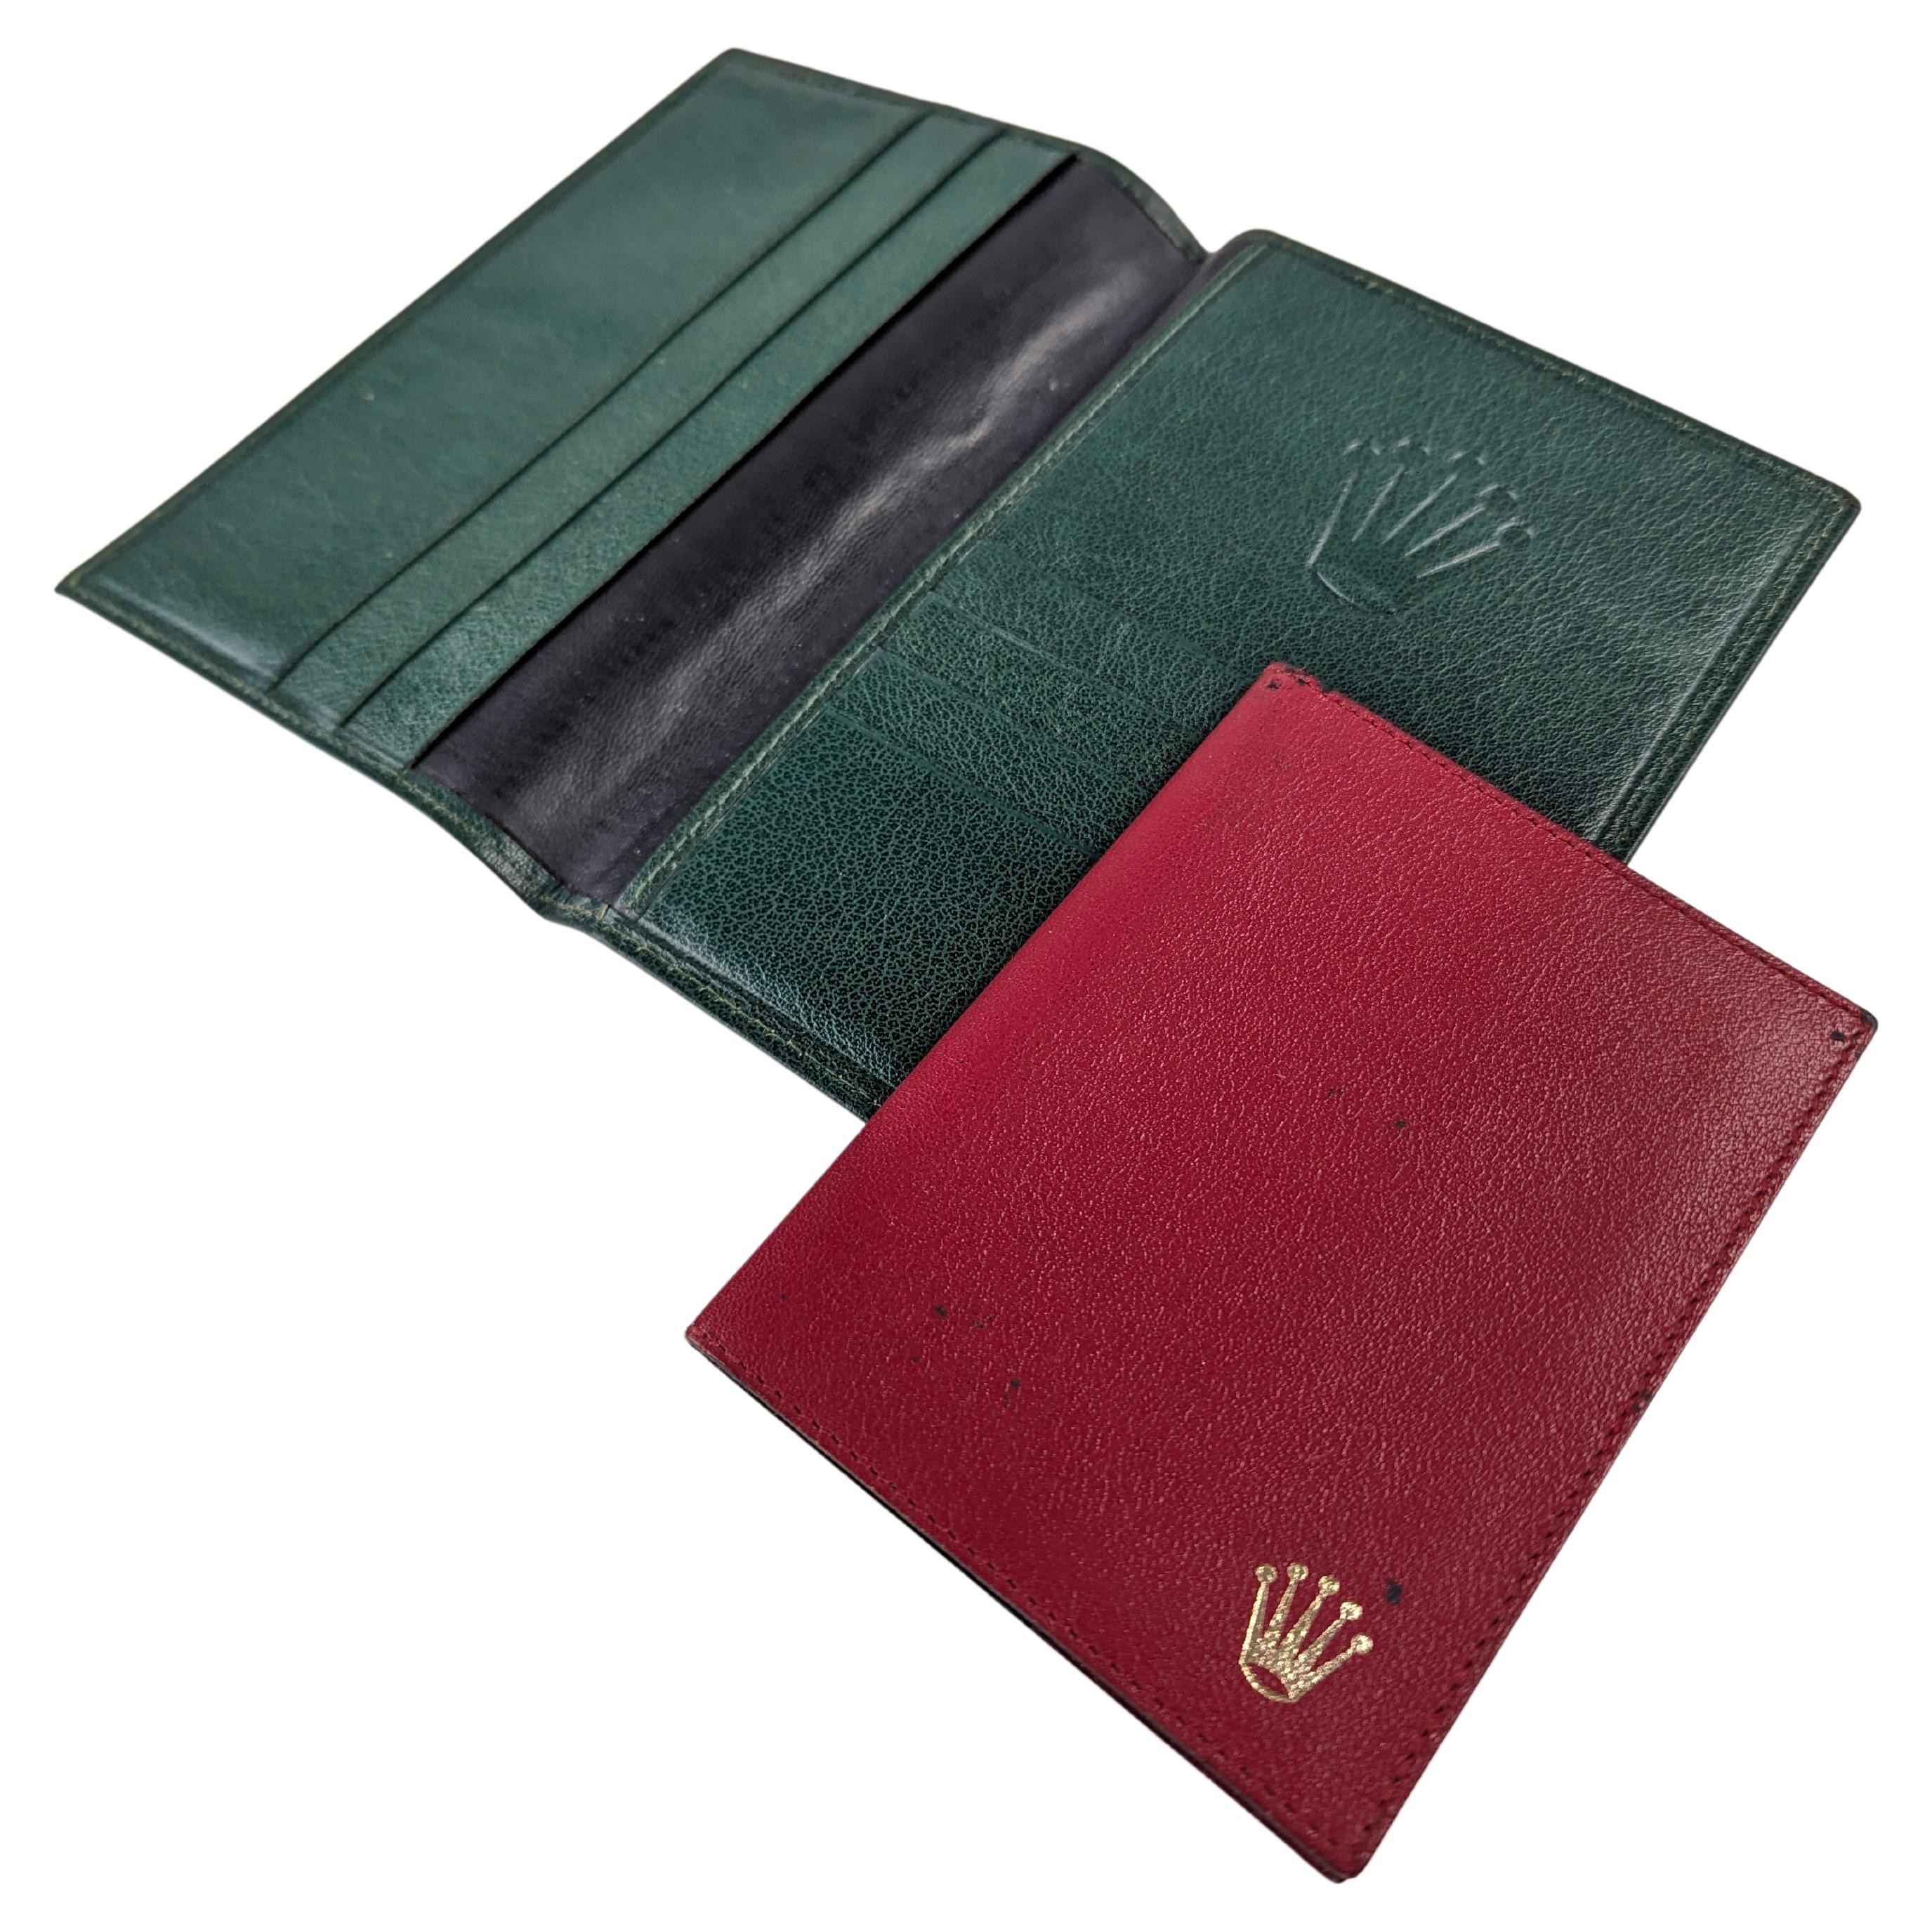 Vintage Rolex Green and Red Leather Wallet and Passport For Sale